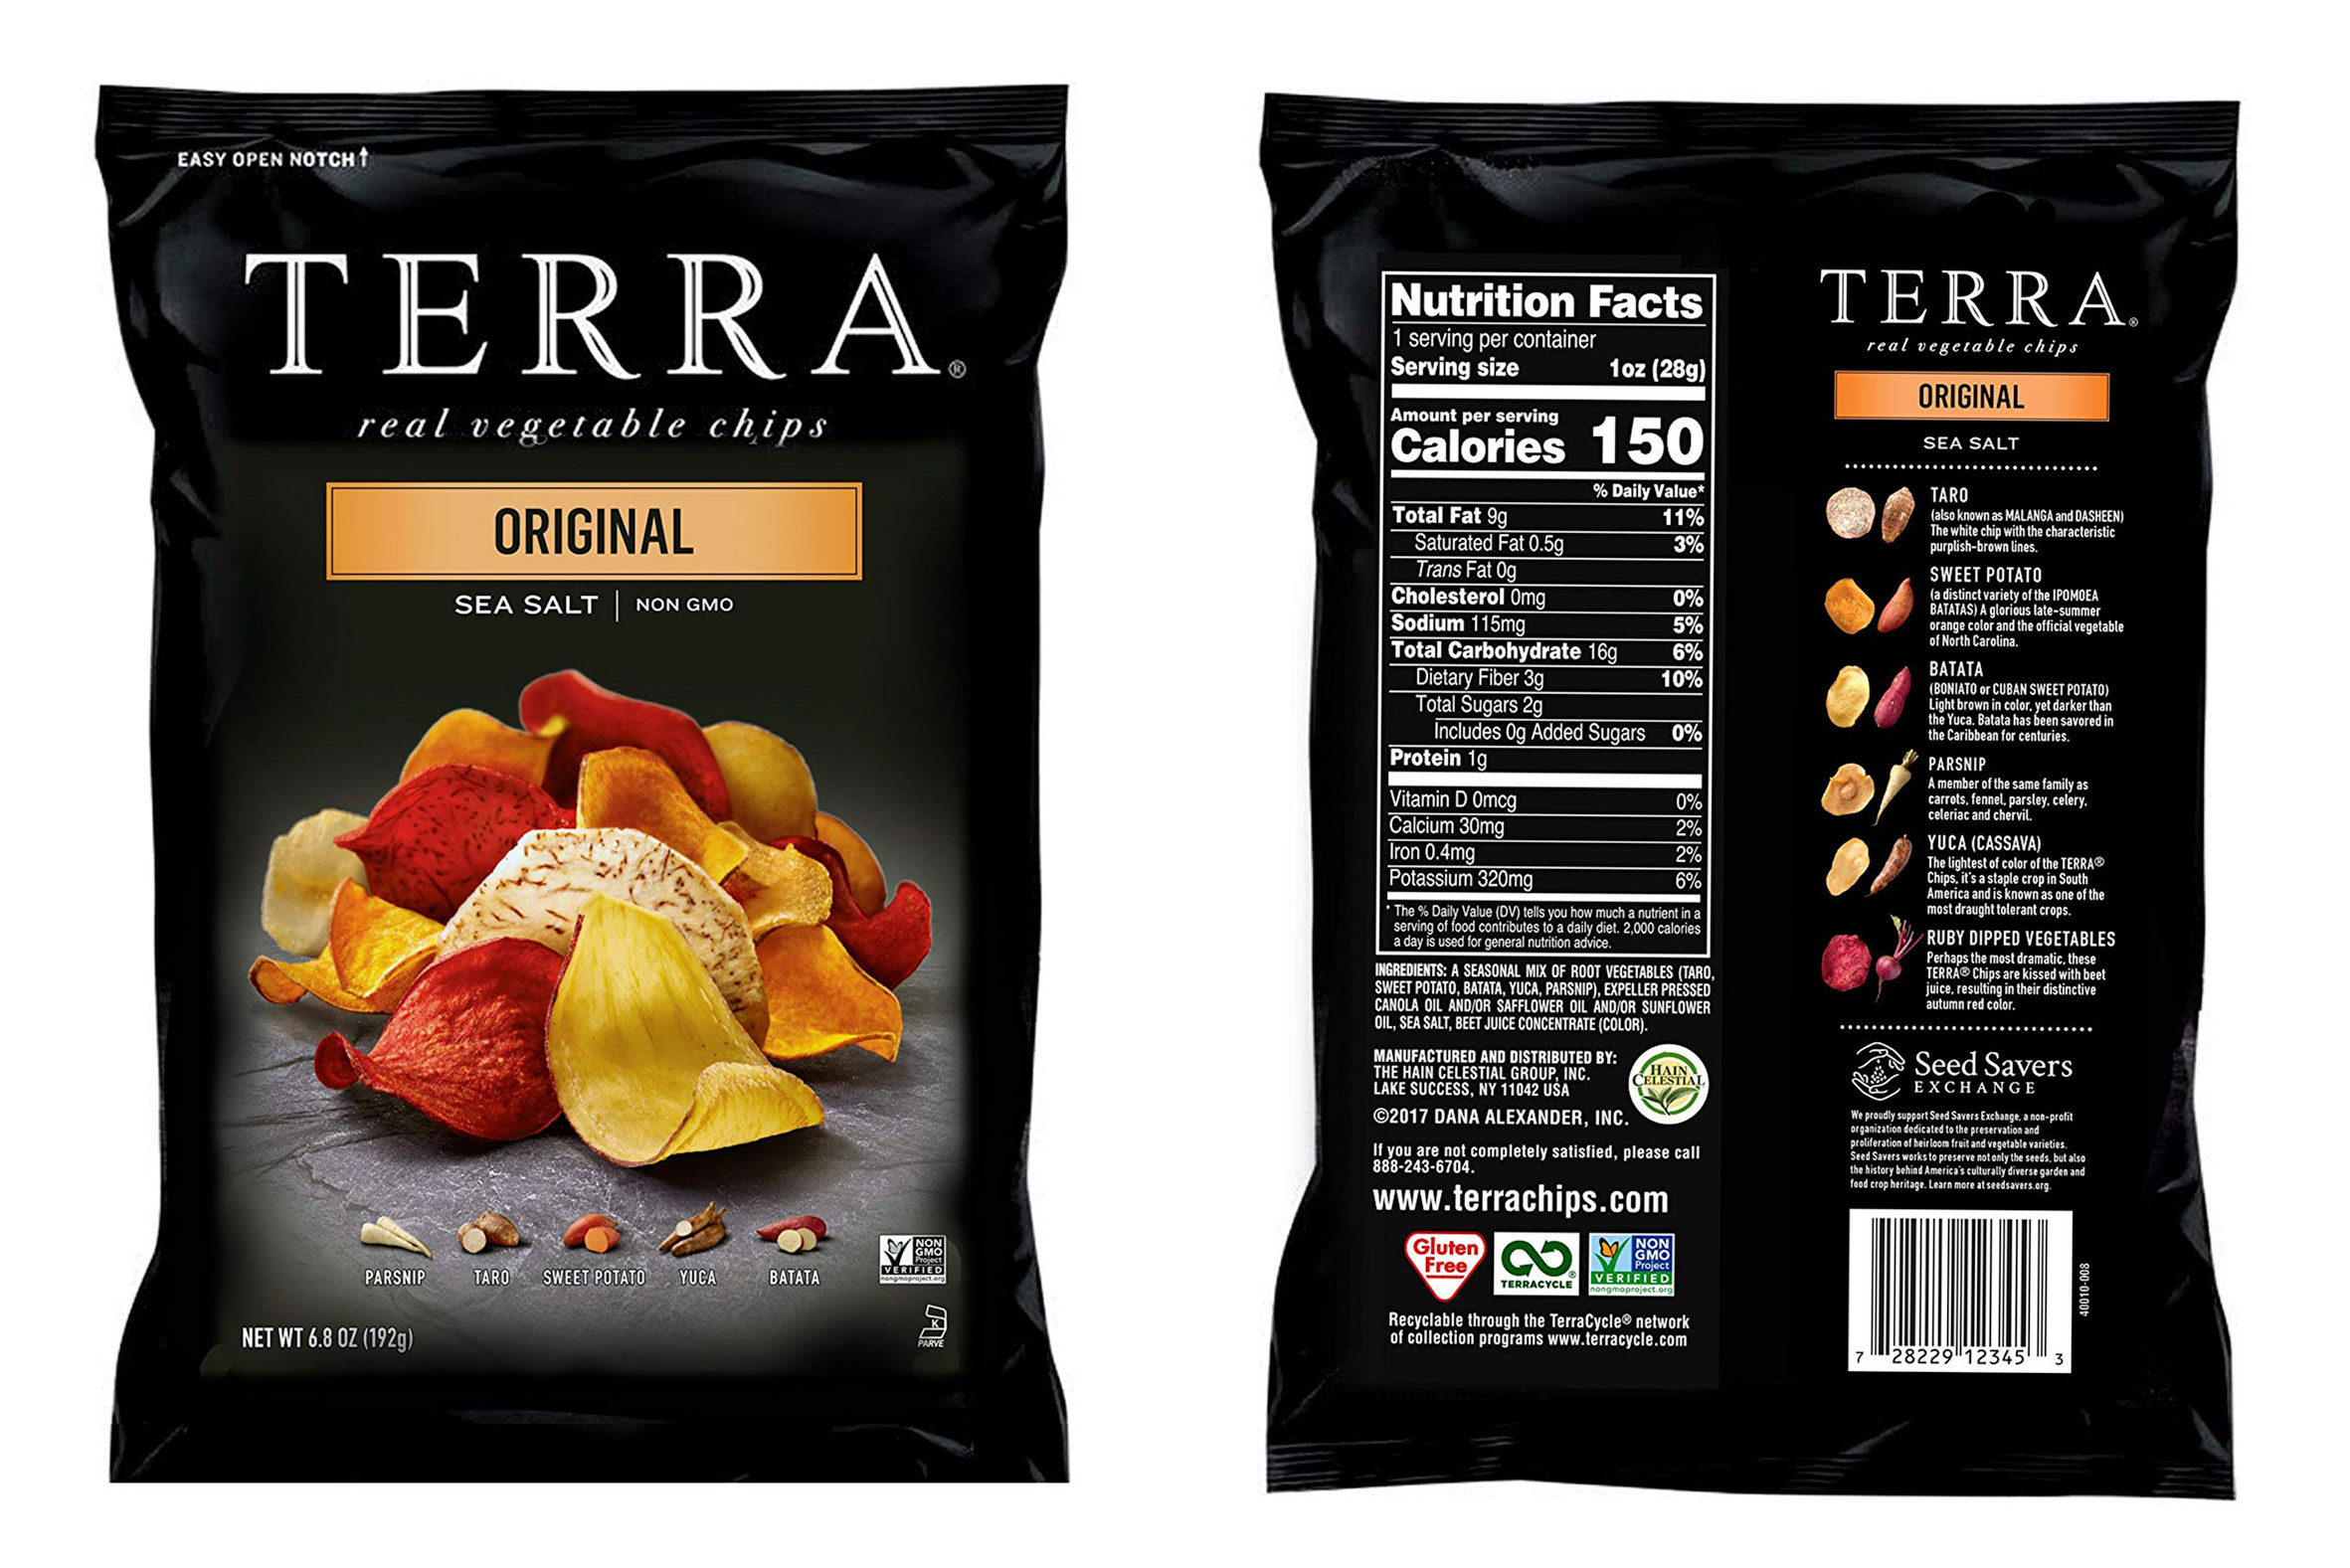 Comparing Terra Chips Label